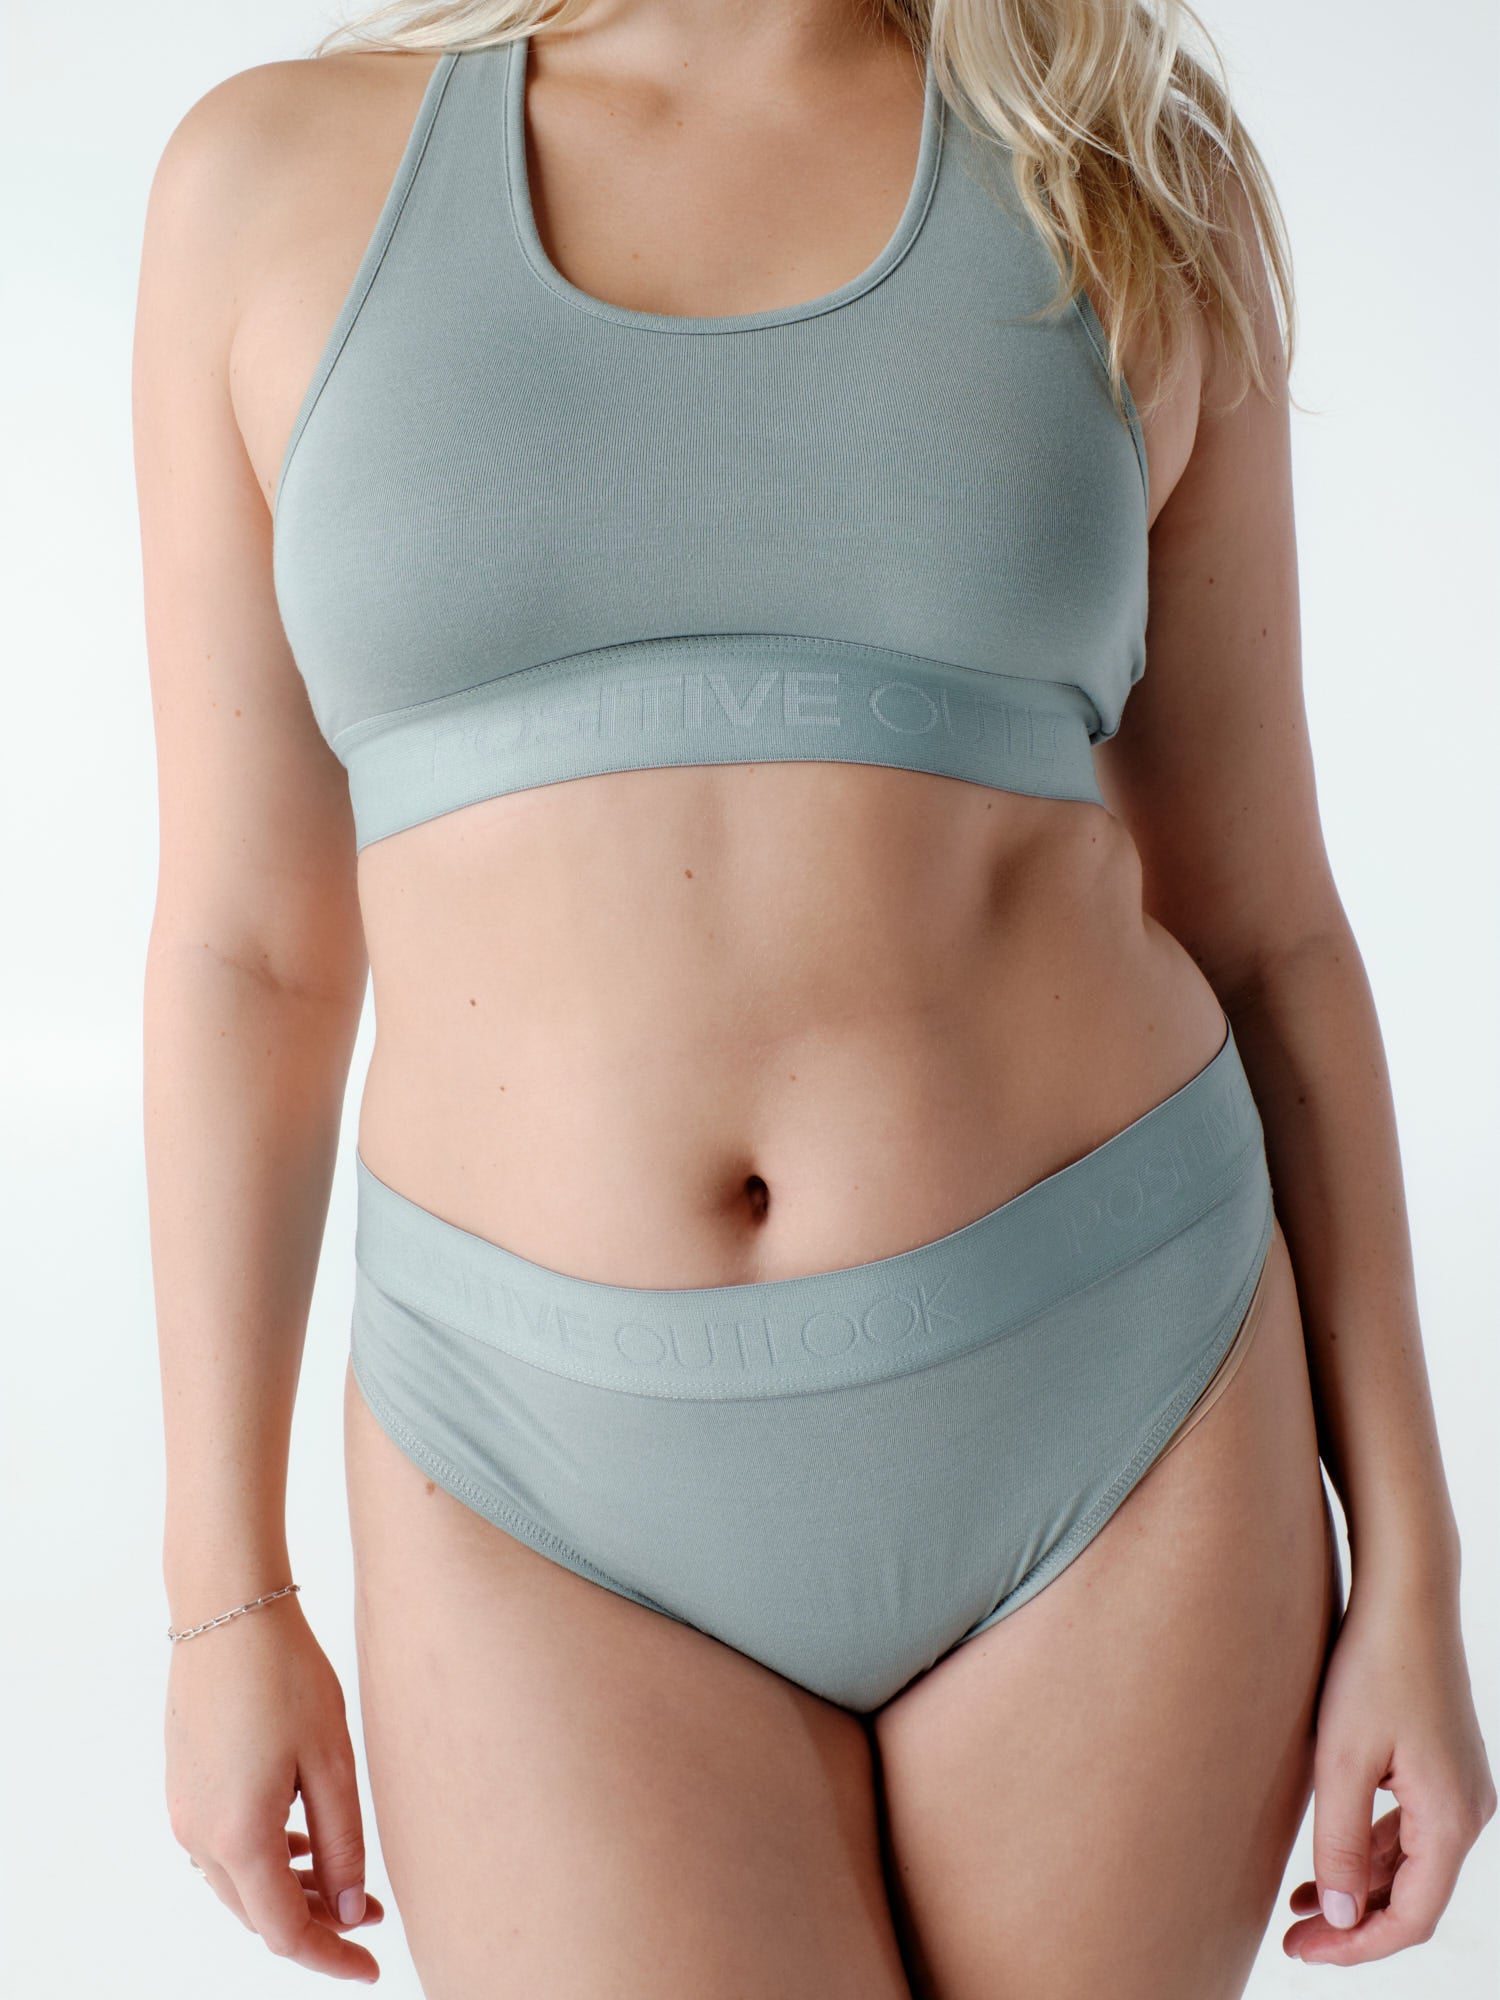 Bamboo - Signature Bralette - Positive Outlook Clothing